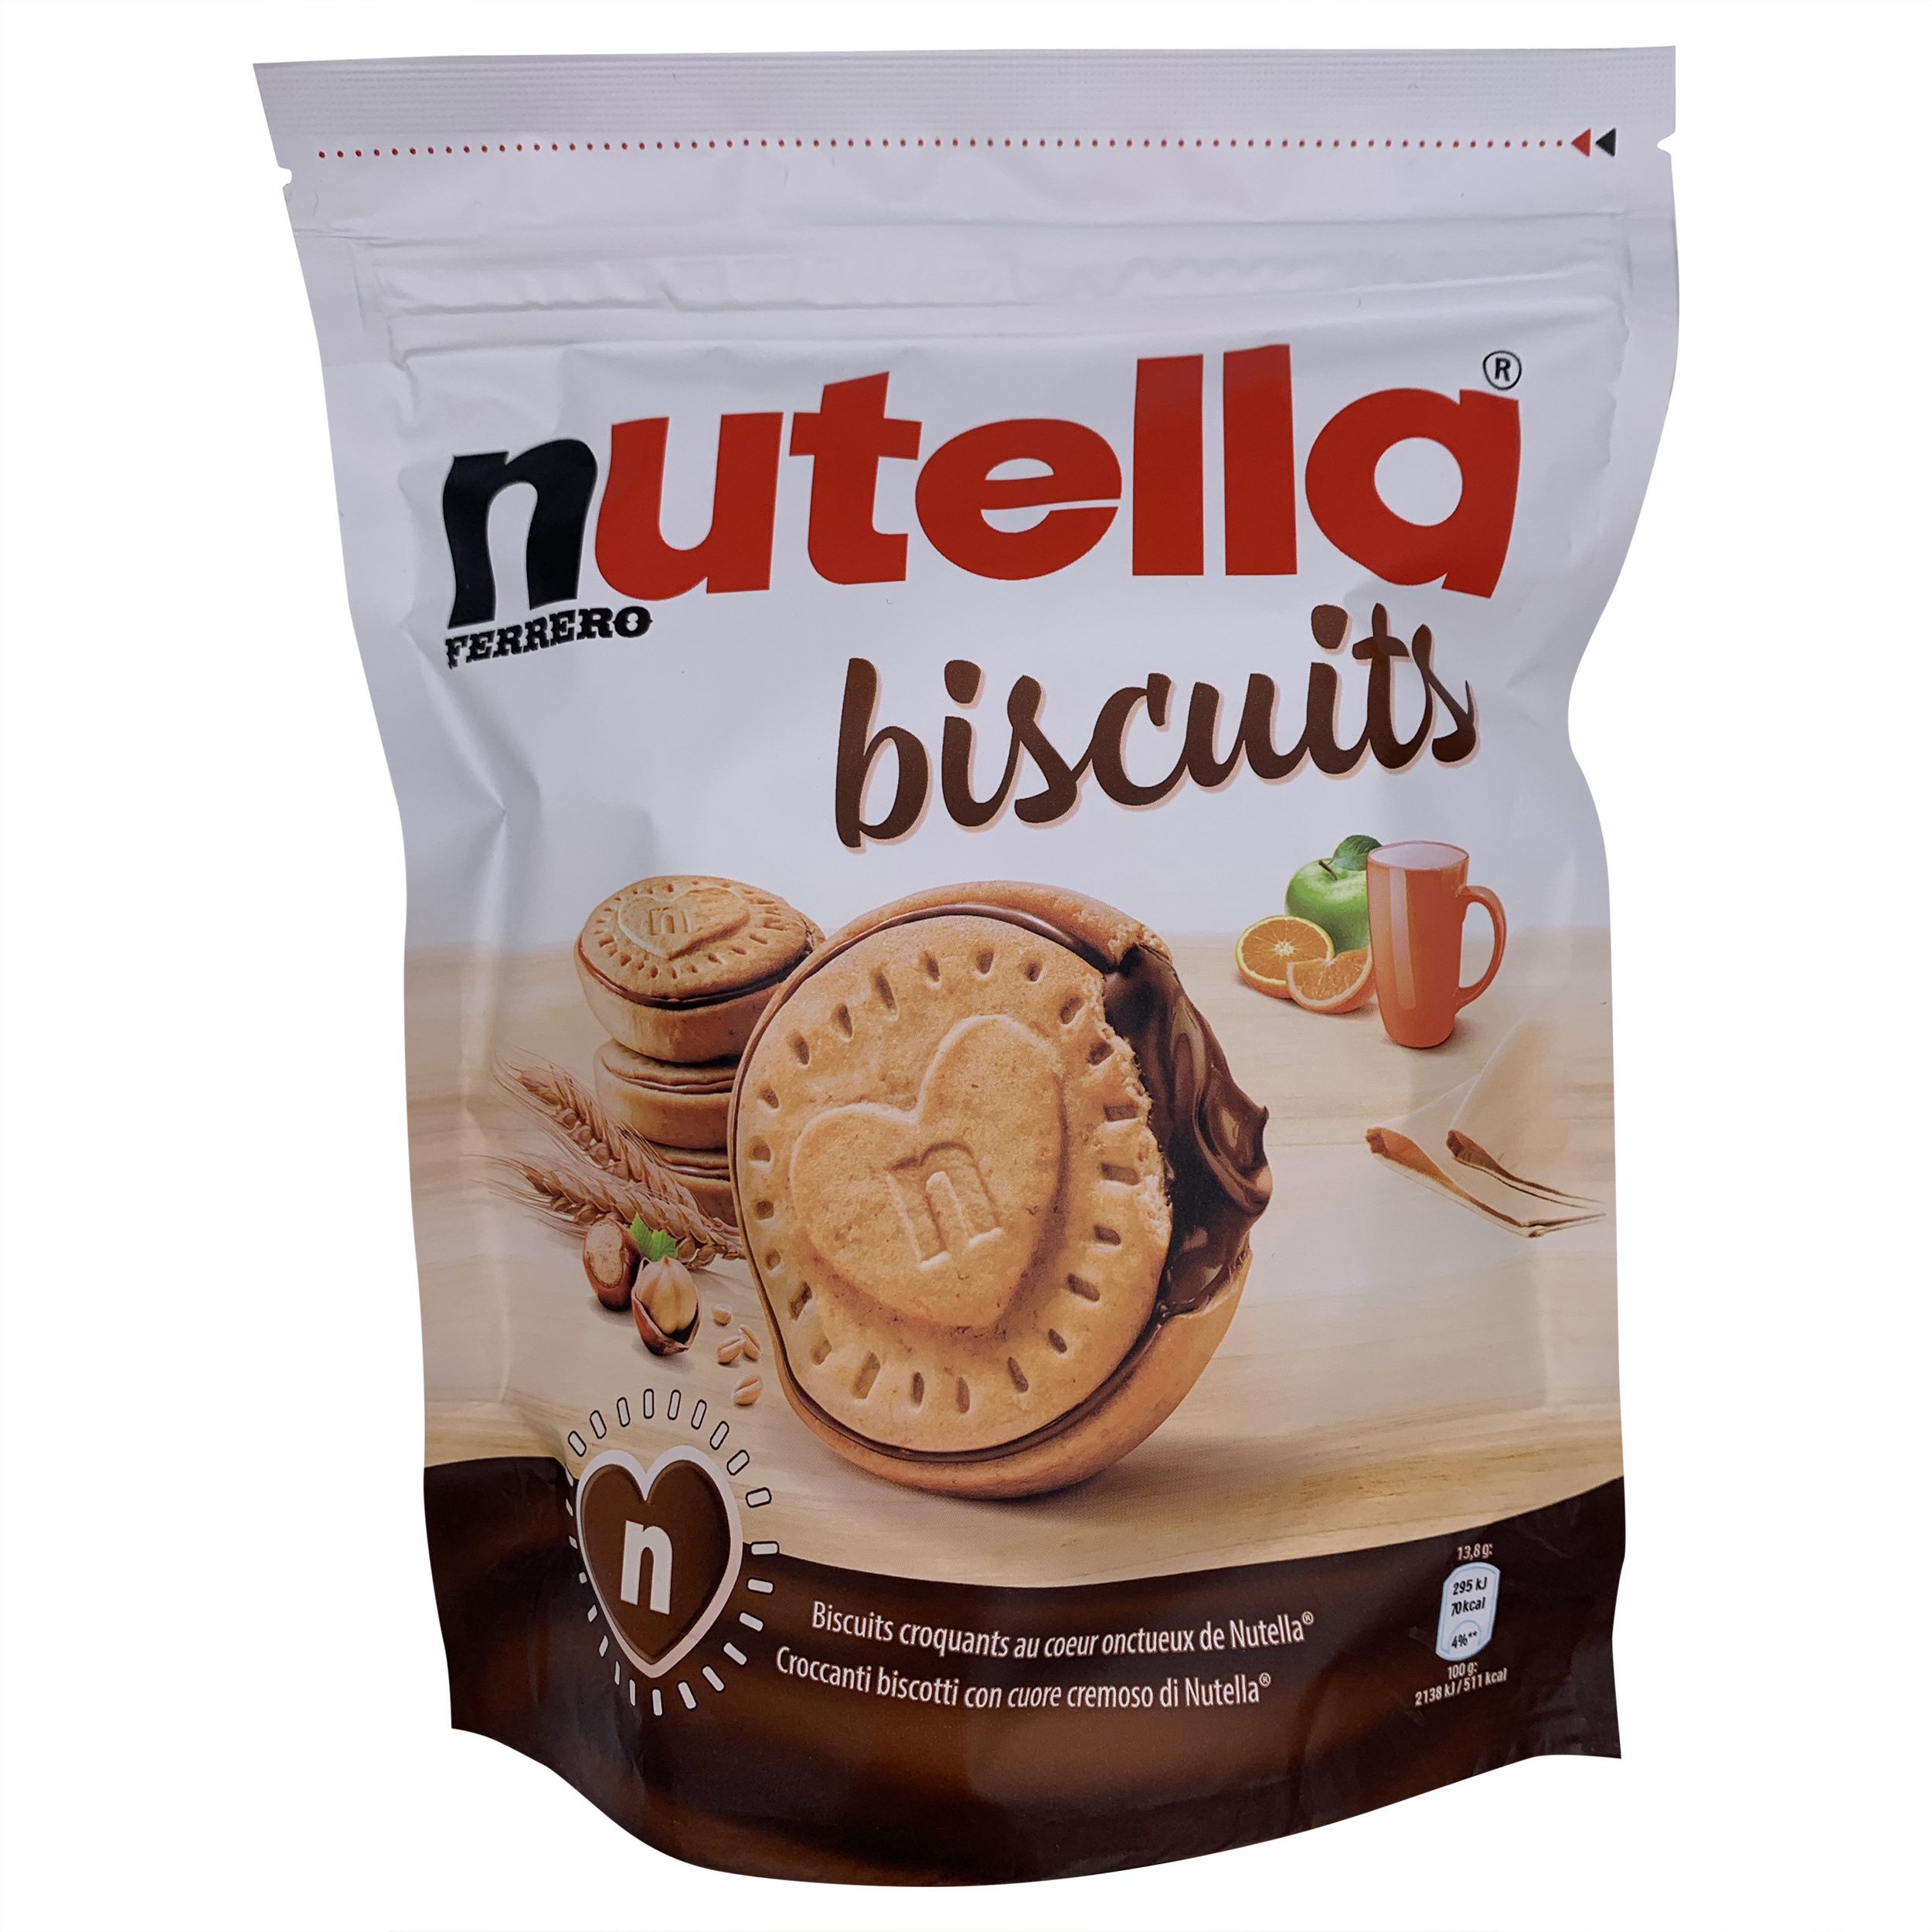 Nutella Biscuits Resealable Bag, Nutella Biscuits Cookies Ferrero, Ferrero Nutella biscuits, Nutella Biscuits Italian